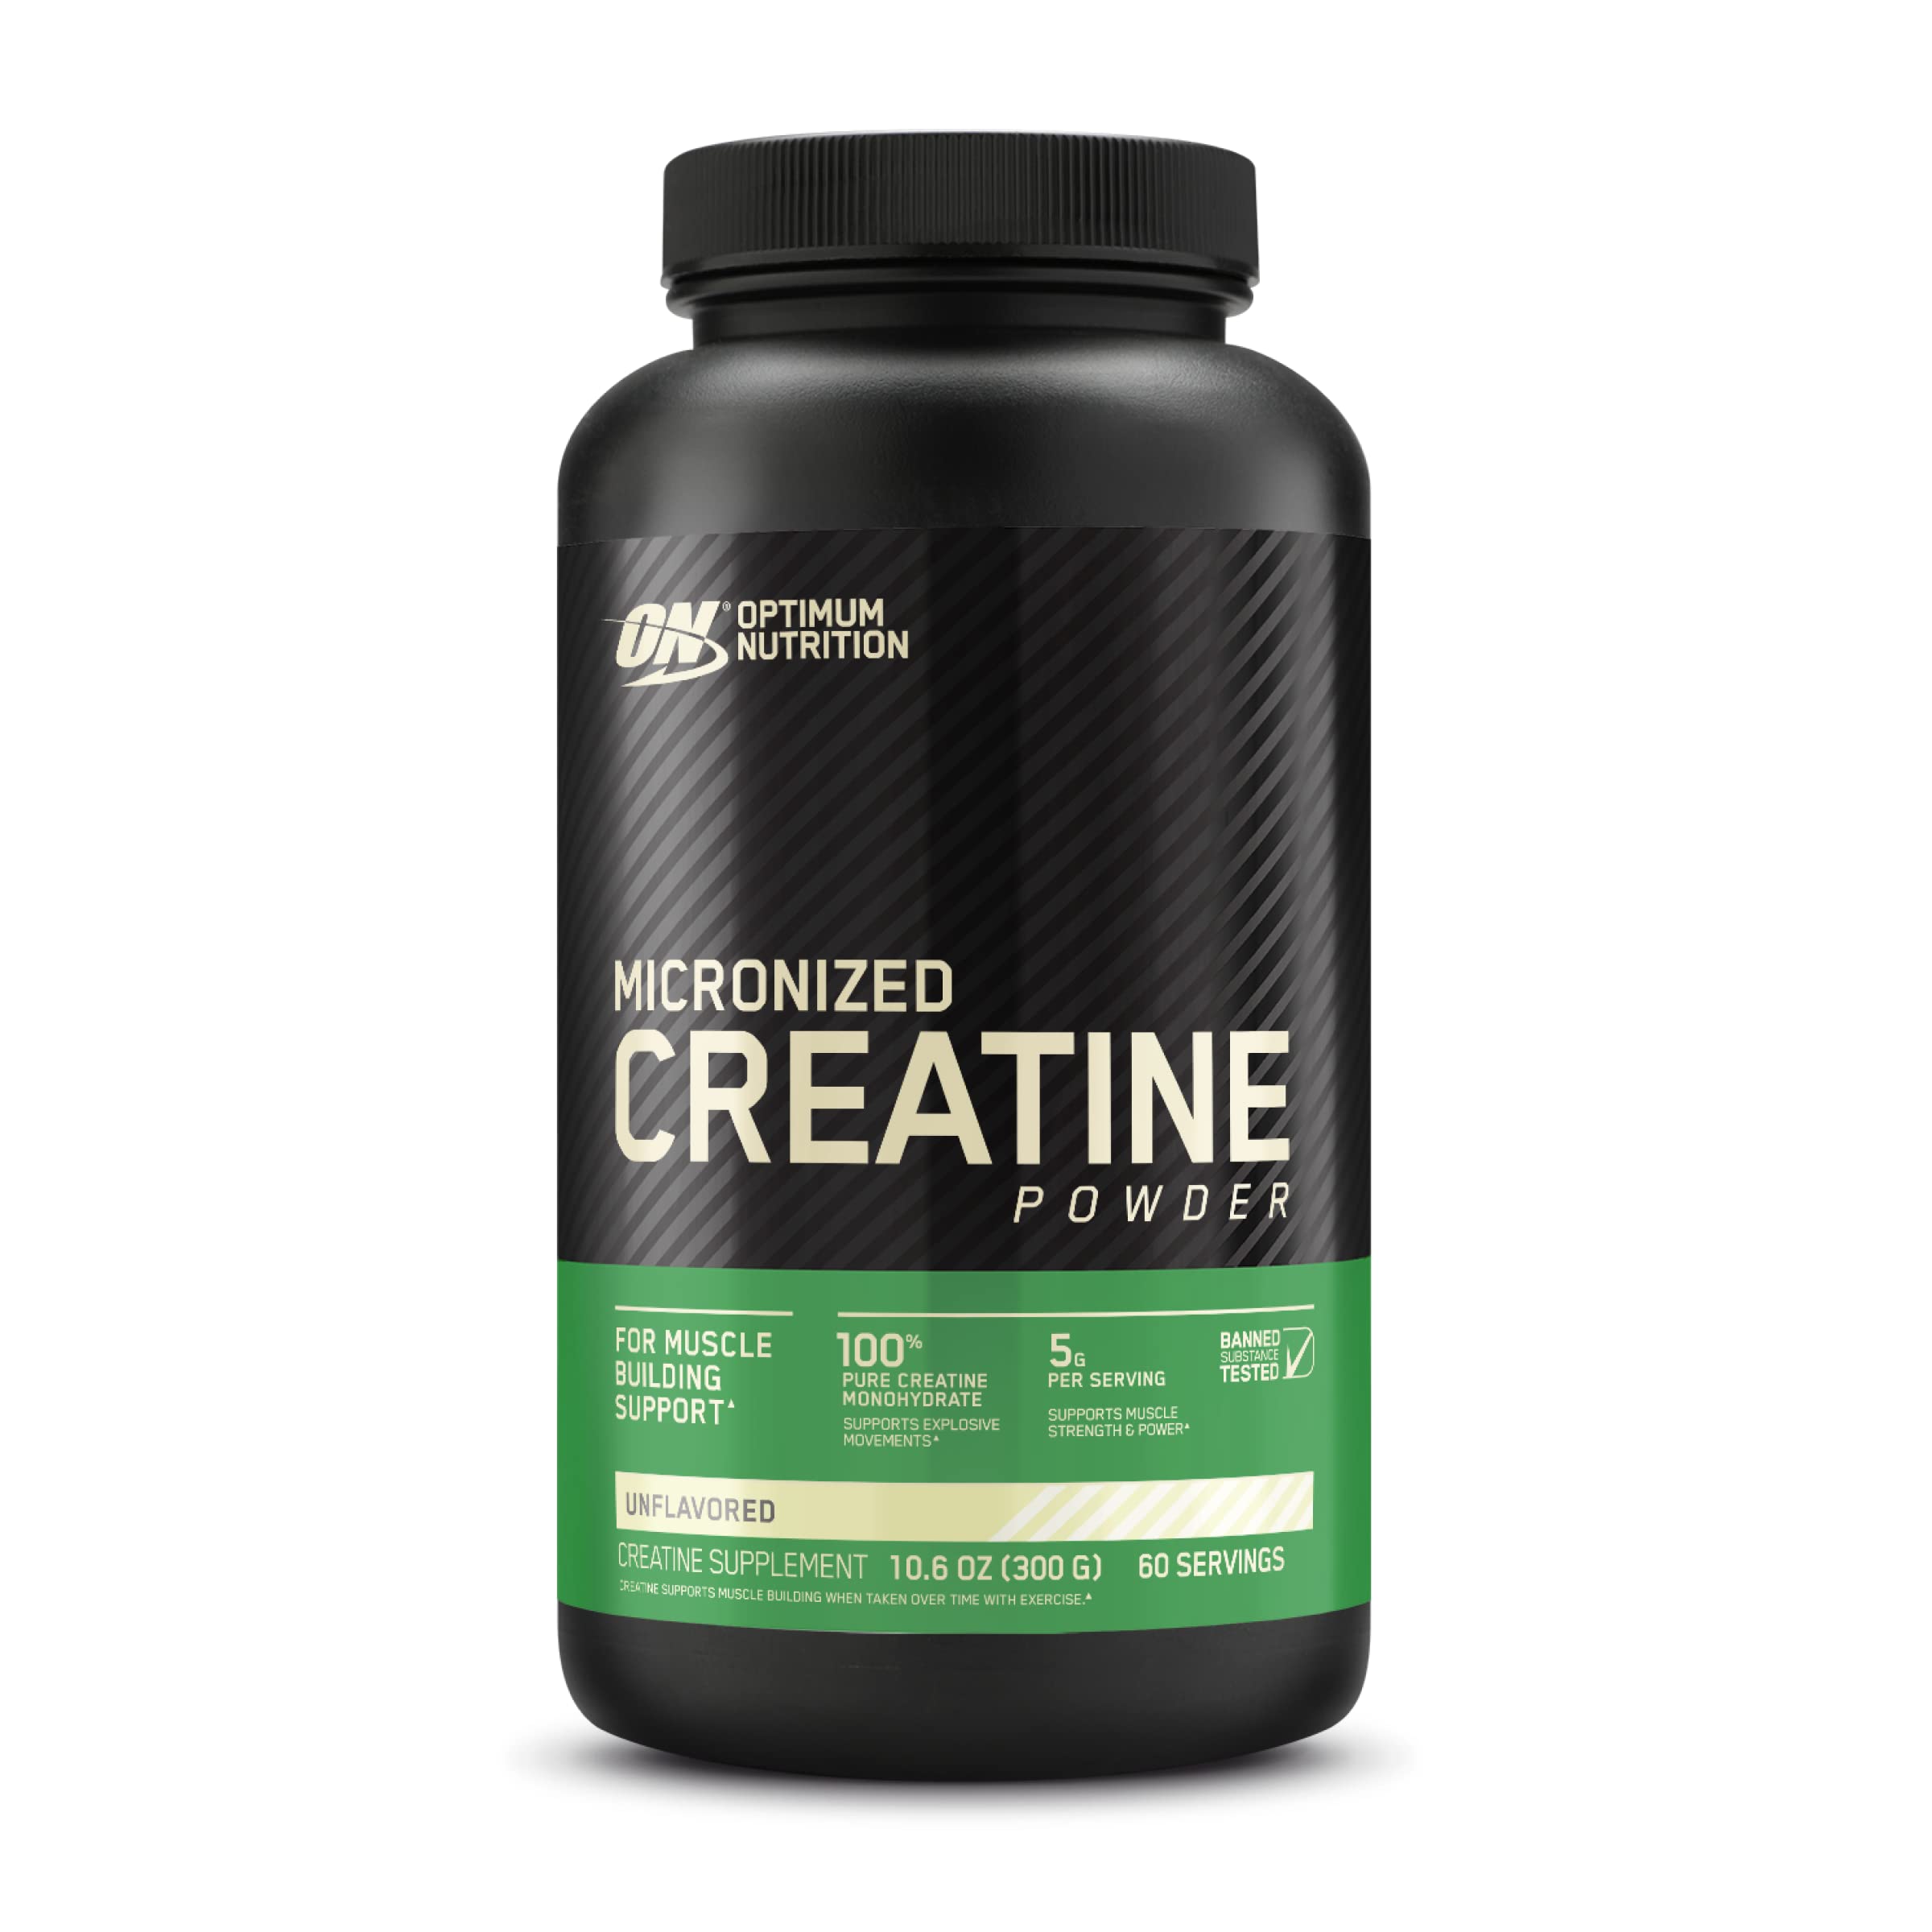 Optimum Nutrition Gold Standard Pre-Workout & Micronized Creatine Monohydrate Powder, Unflavored, Keto Friendly, 60 Servings (Packaging May Vary)